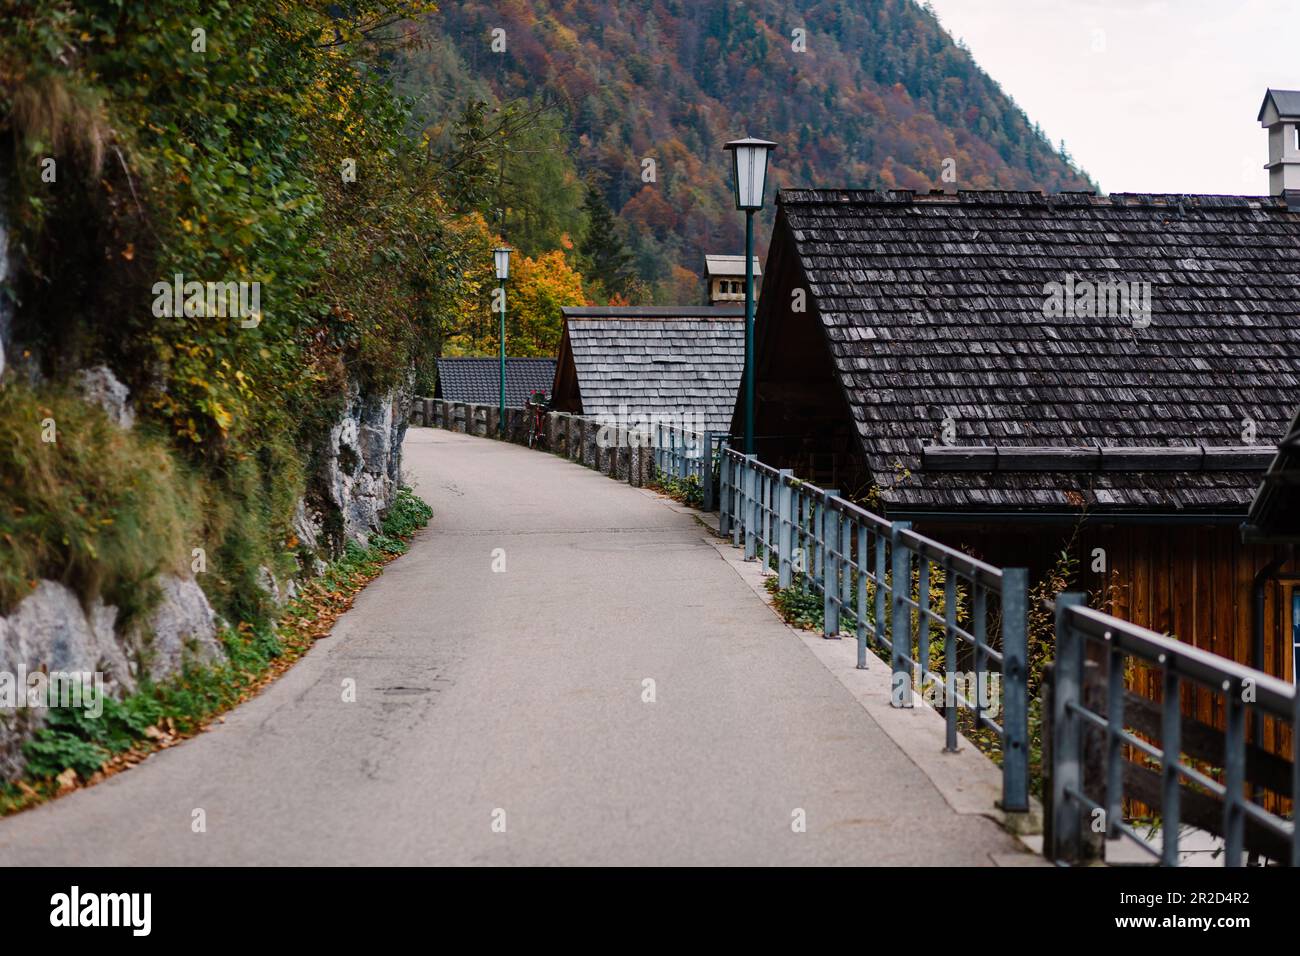 empty street surrounded by wooden houses and Alpine mountains Stock Photo